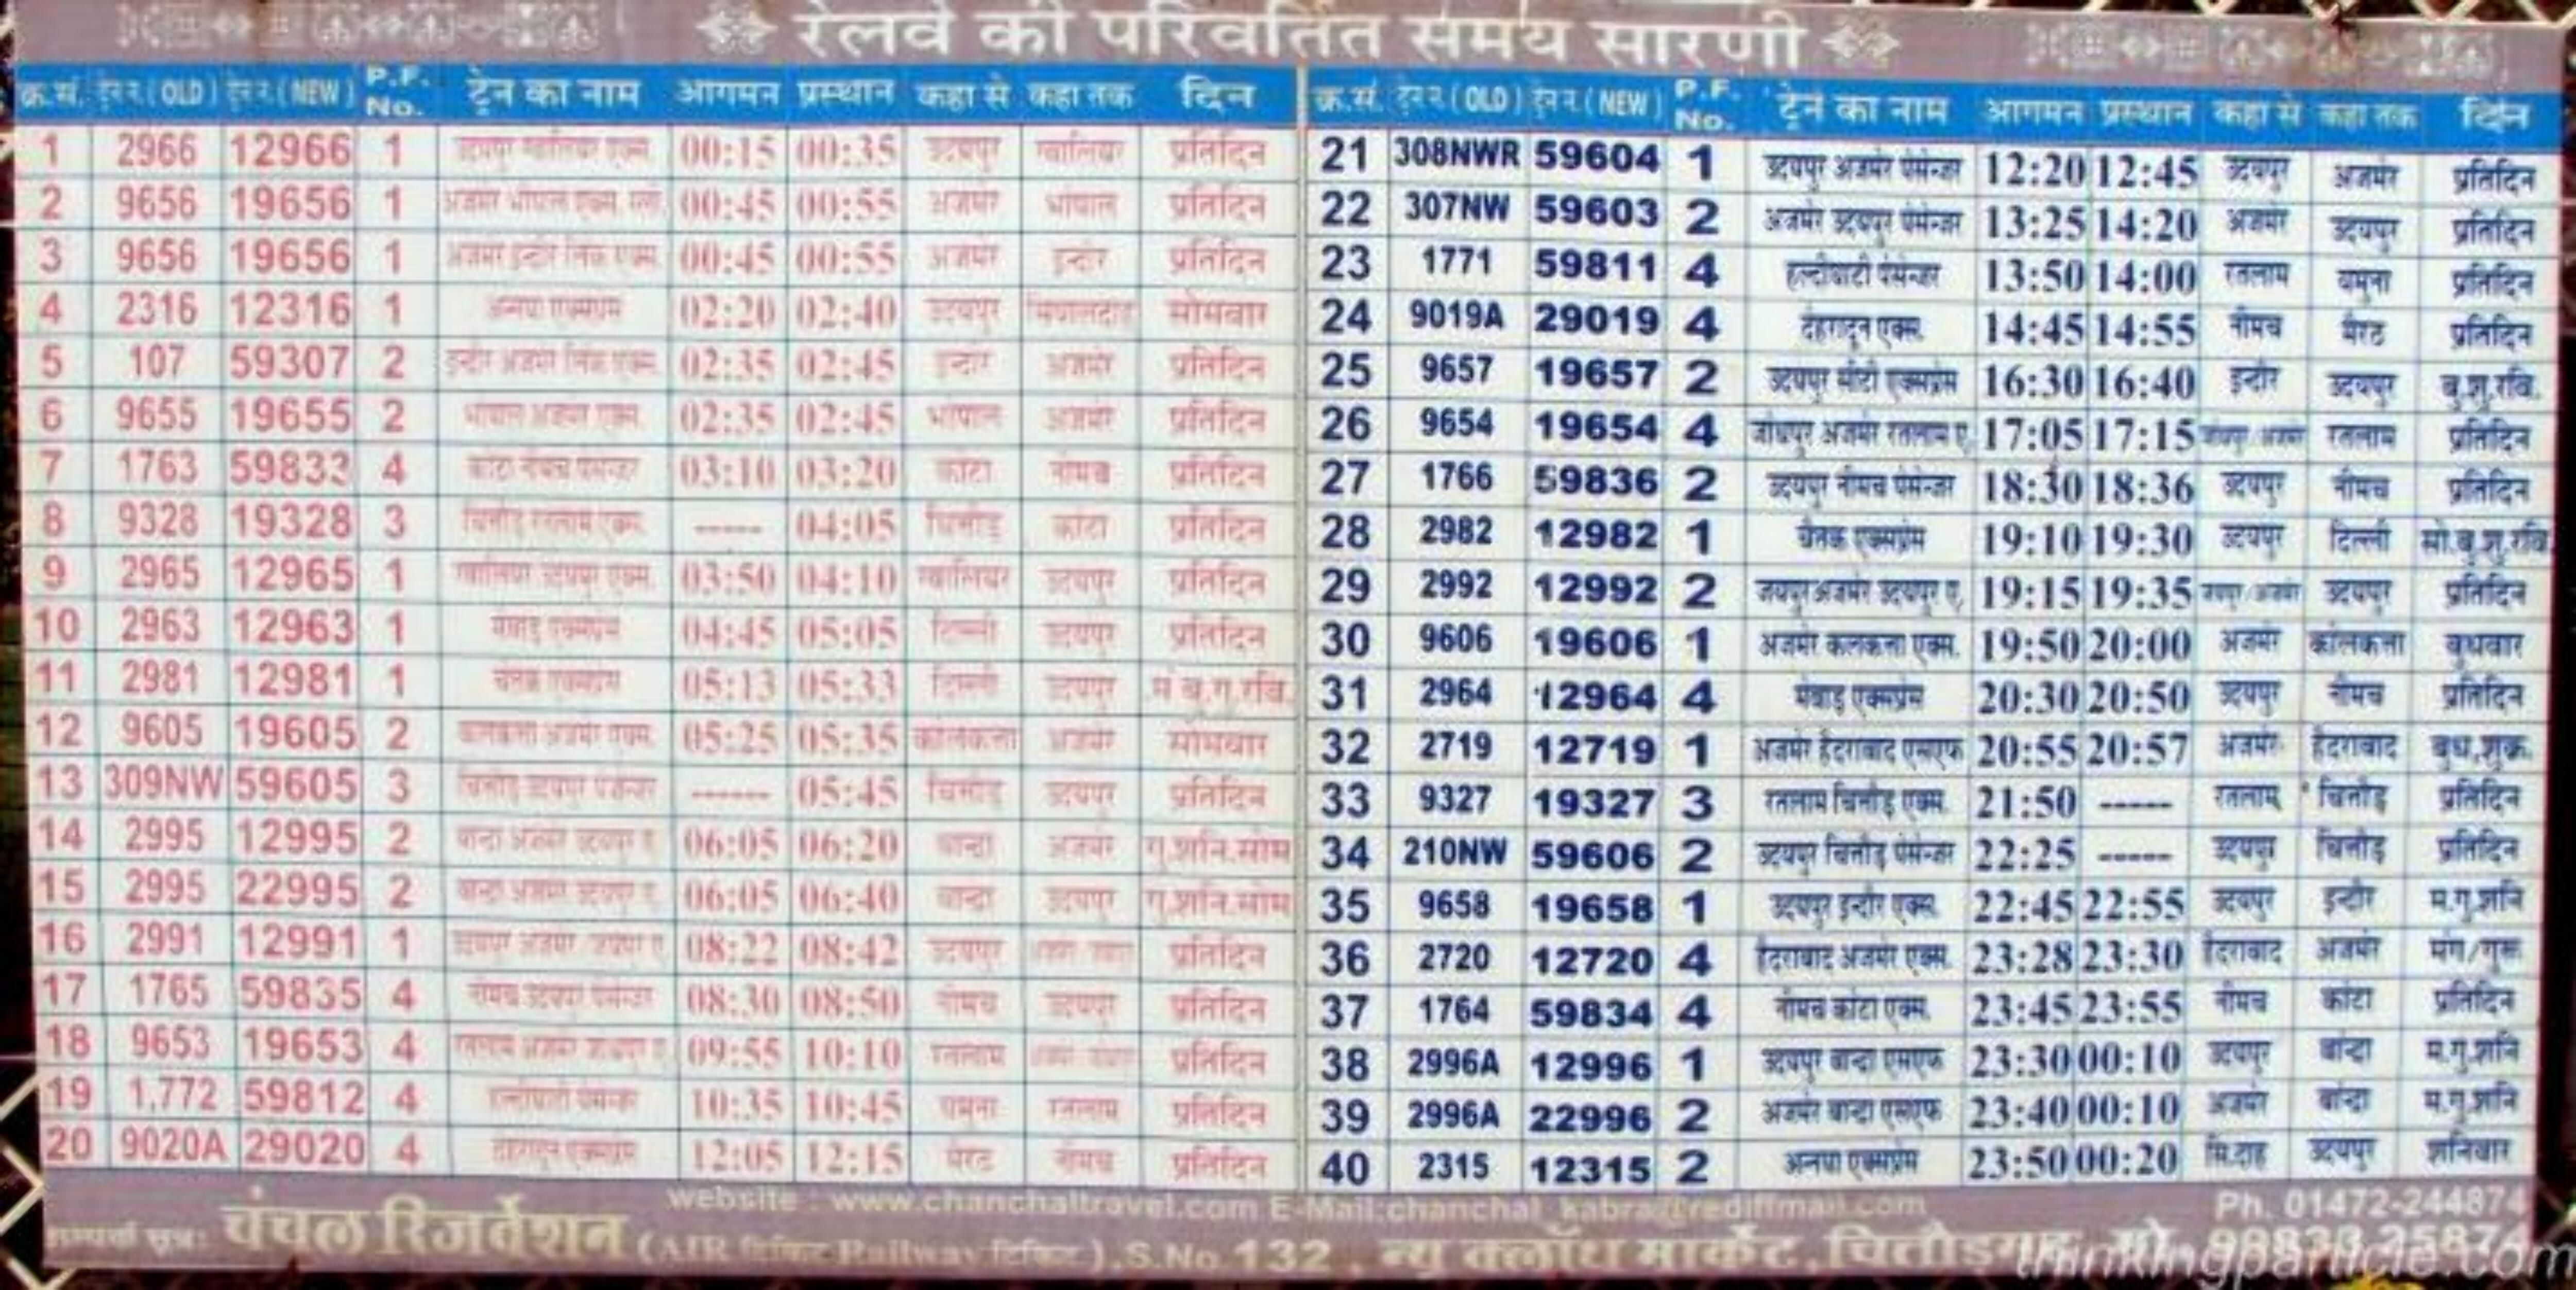 How do you access the Indian railways time table?